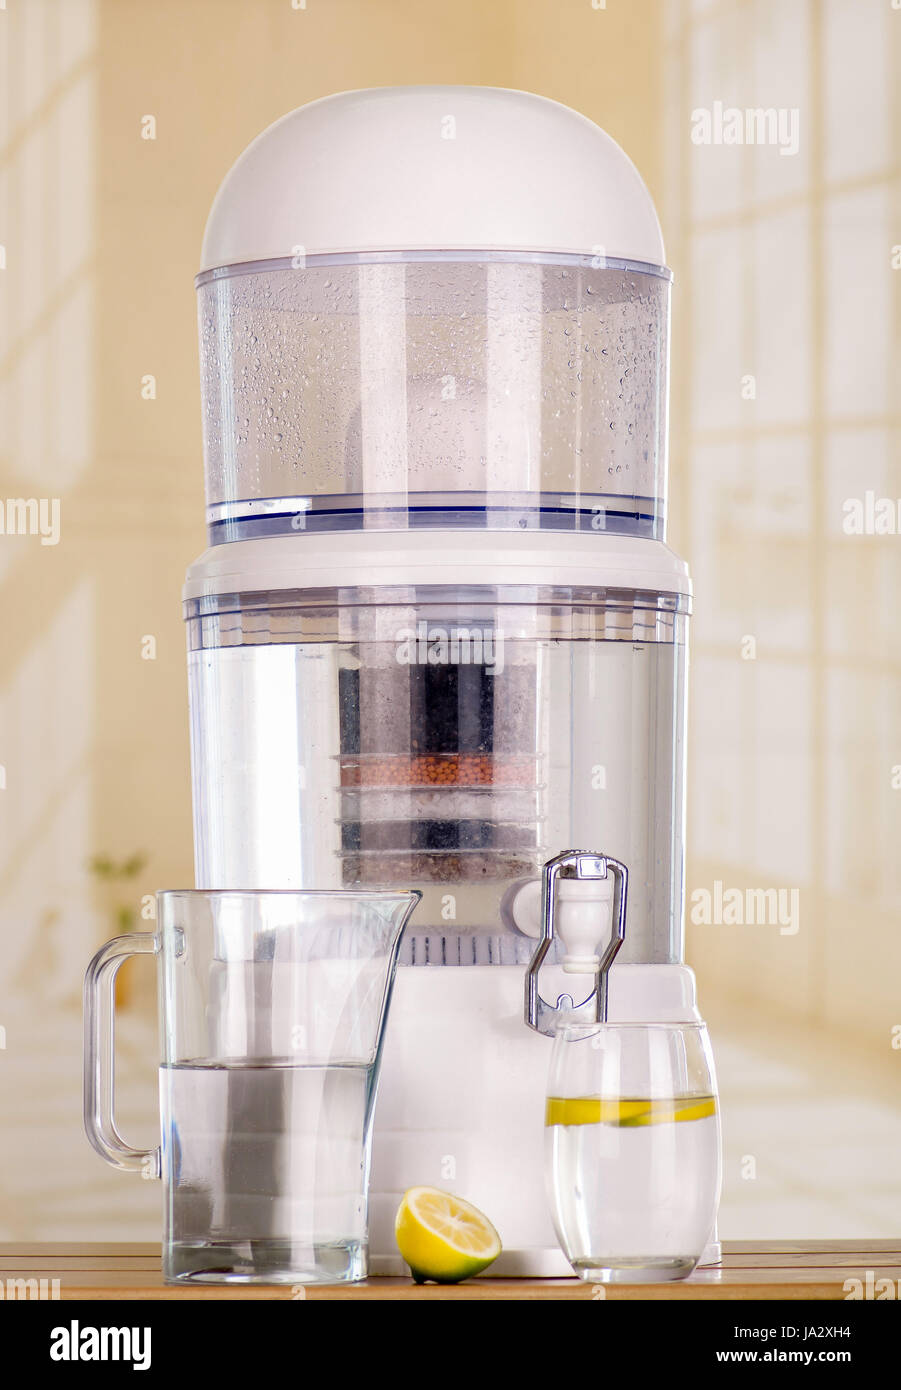 Filter system of water purifier on a kitchen background Stock Photo